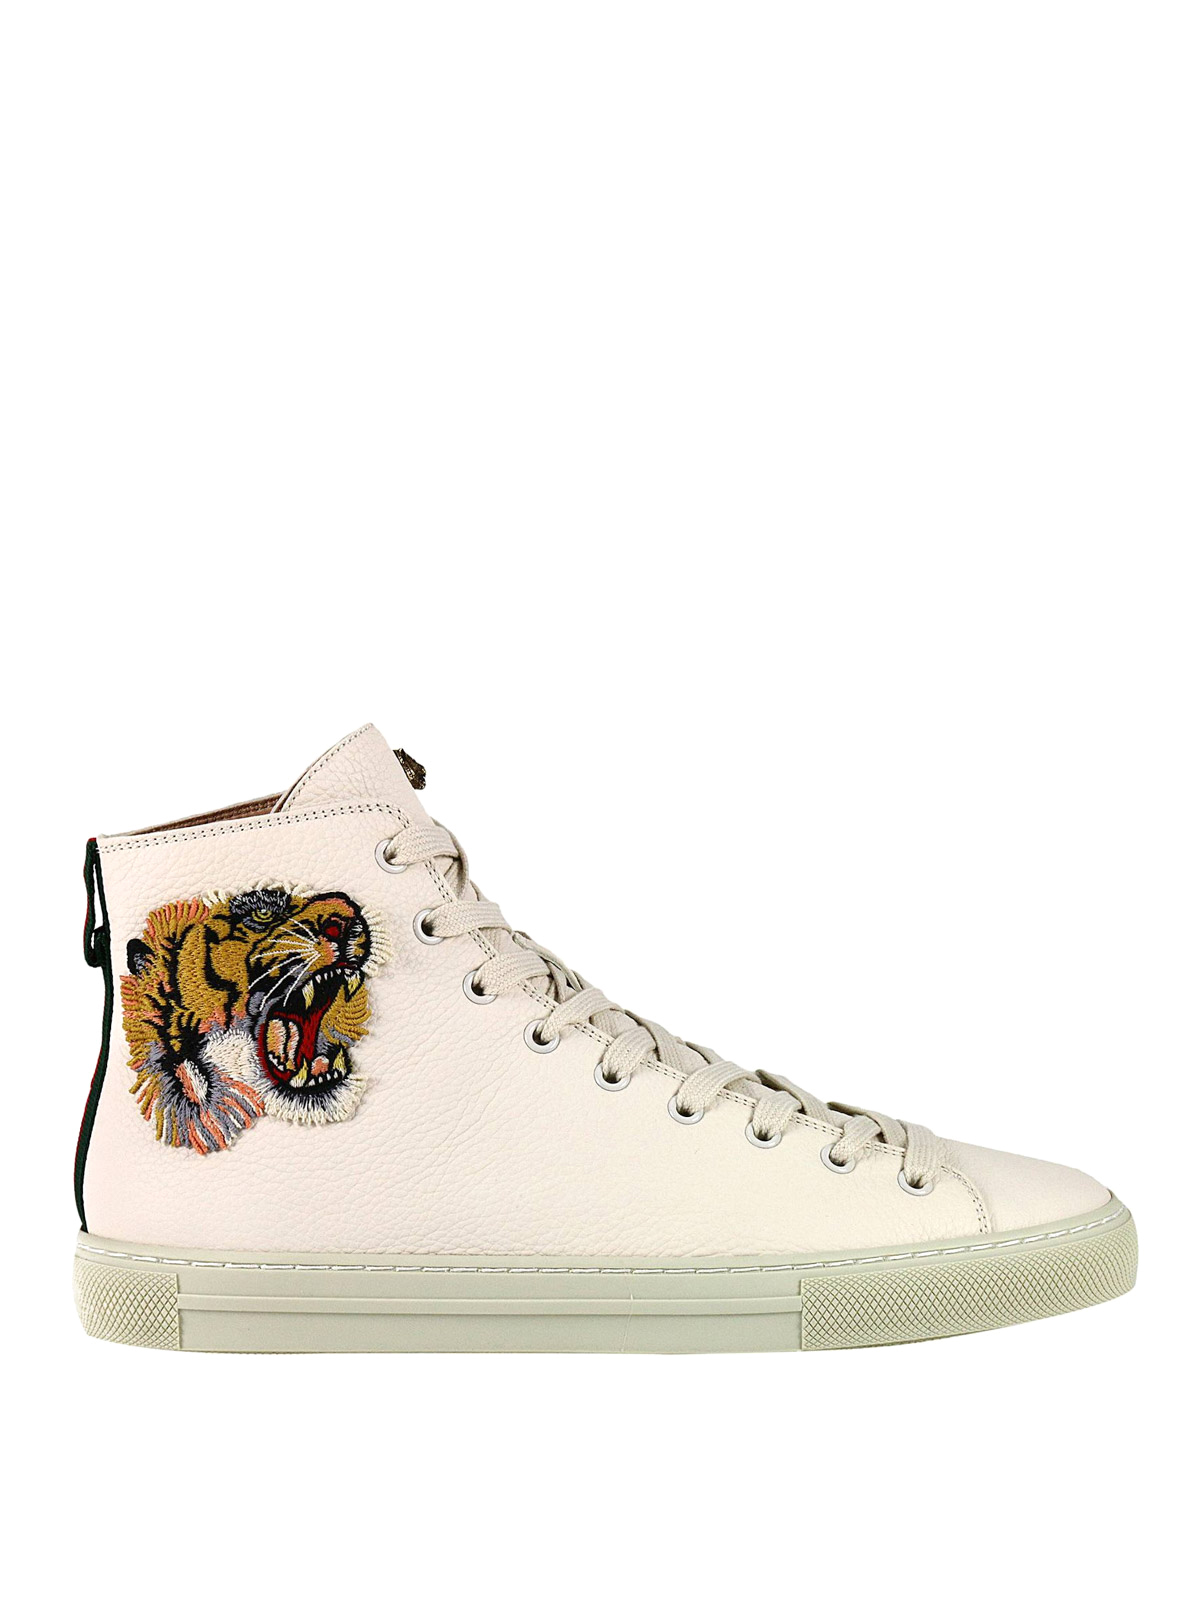 Gucci - Tiger embroidered high top 